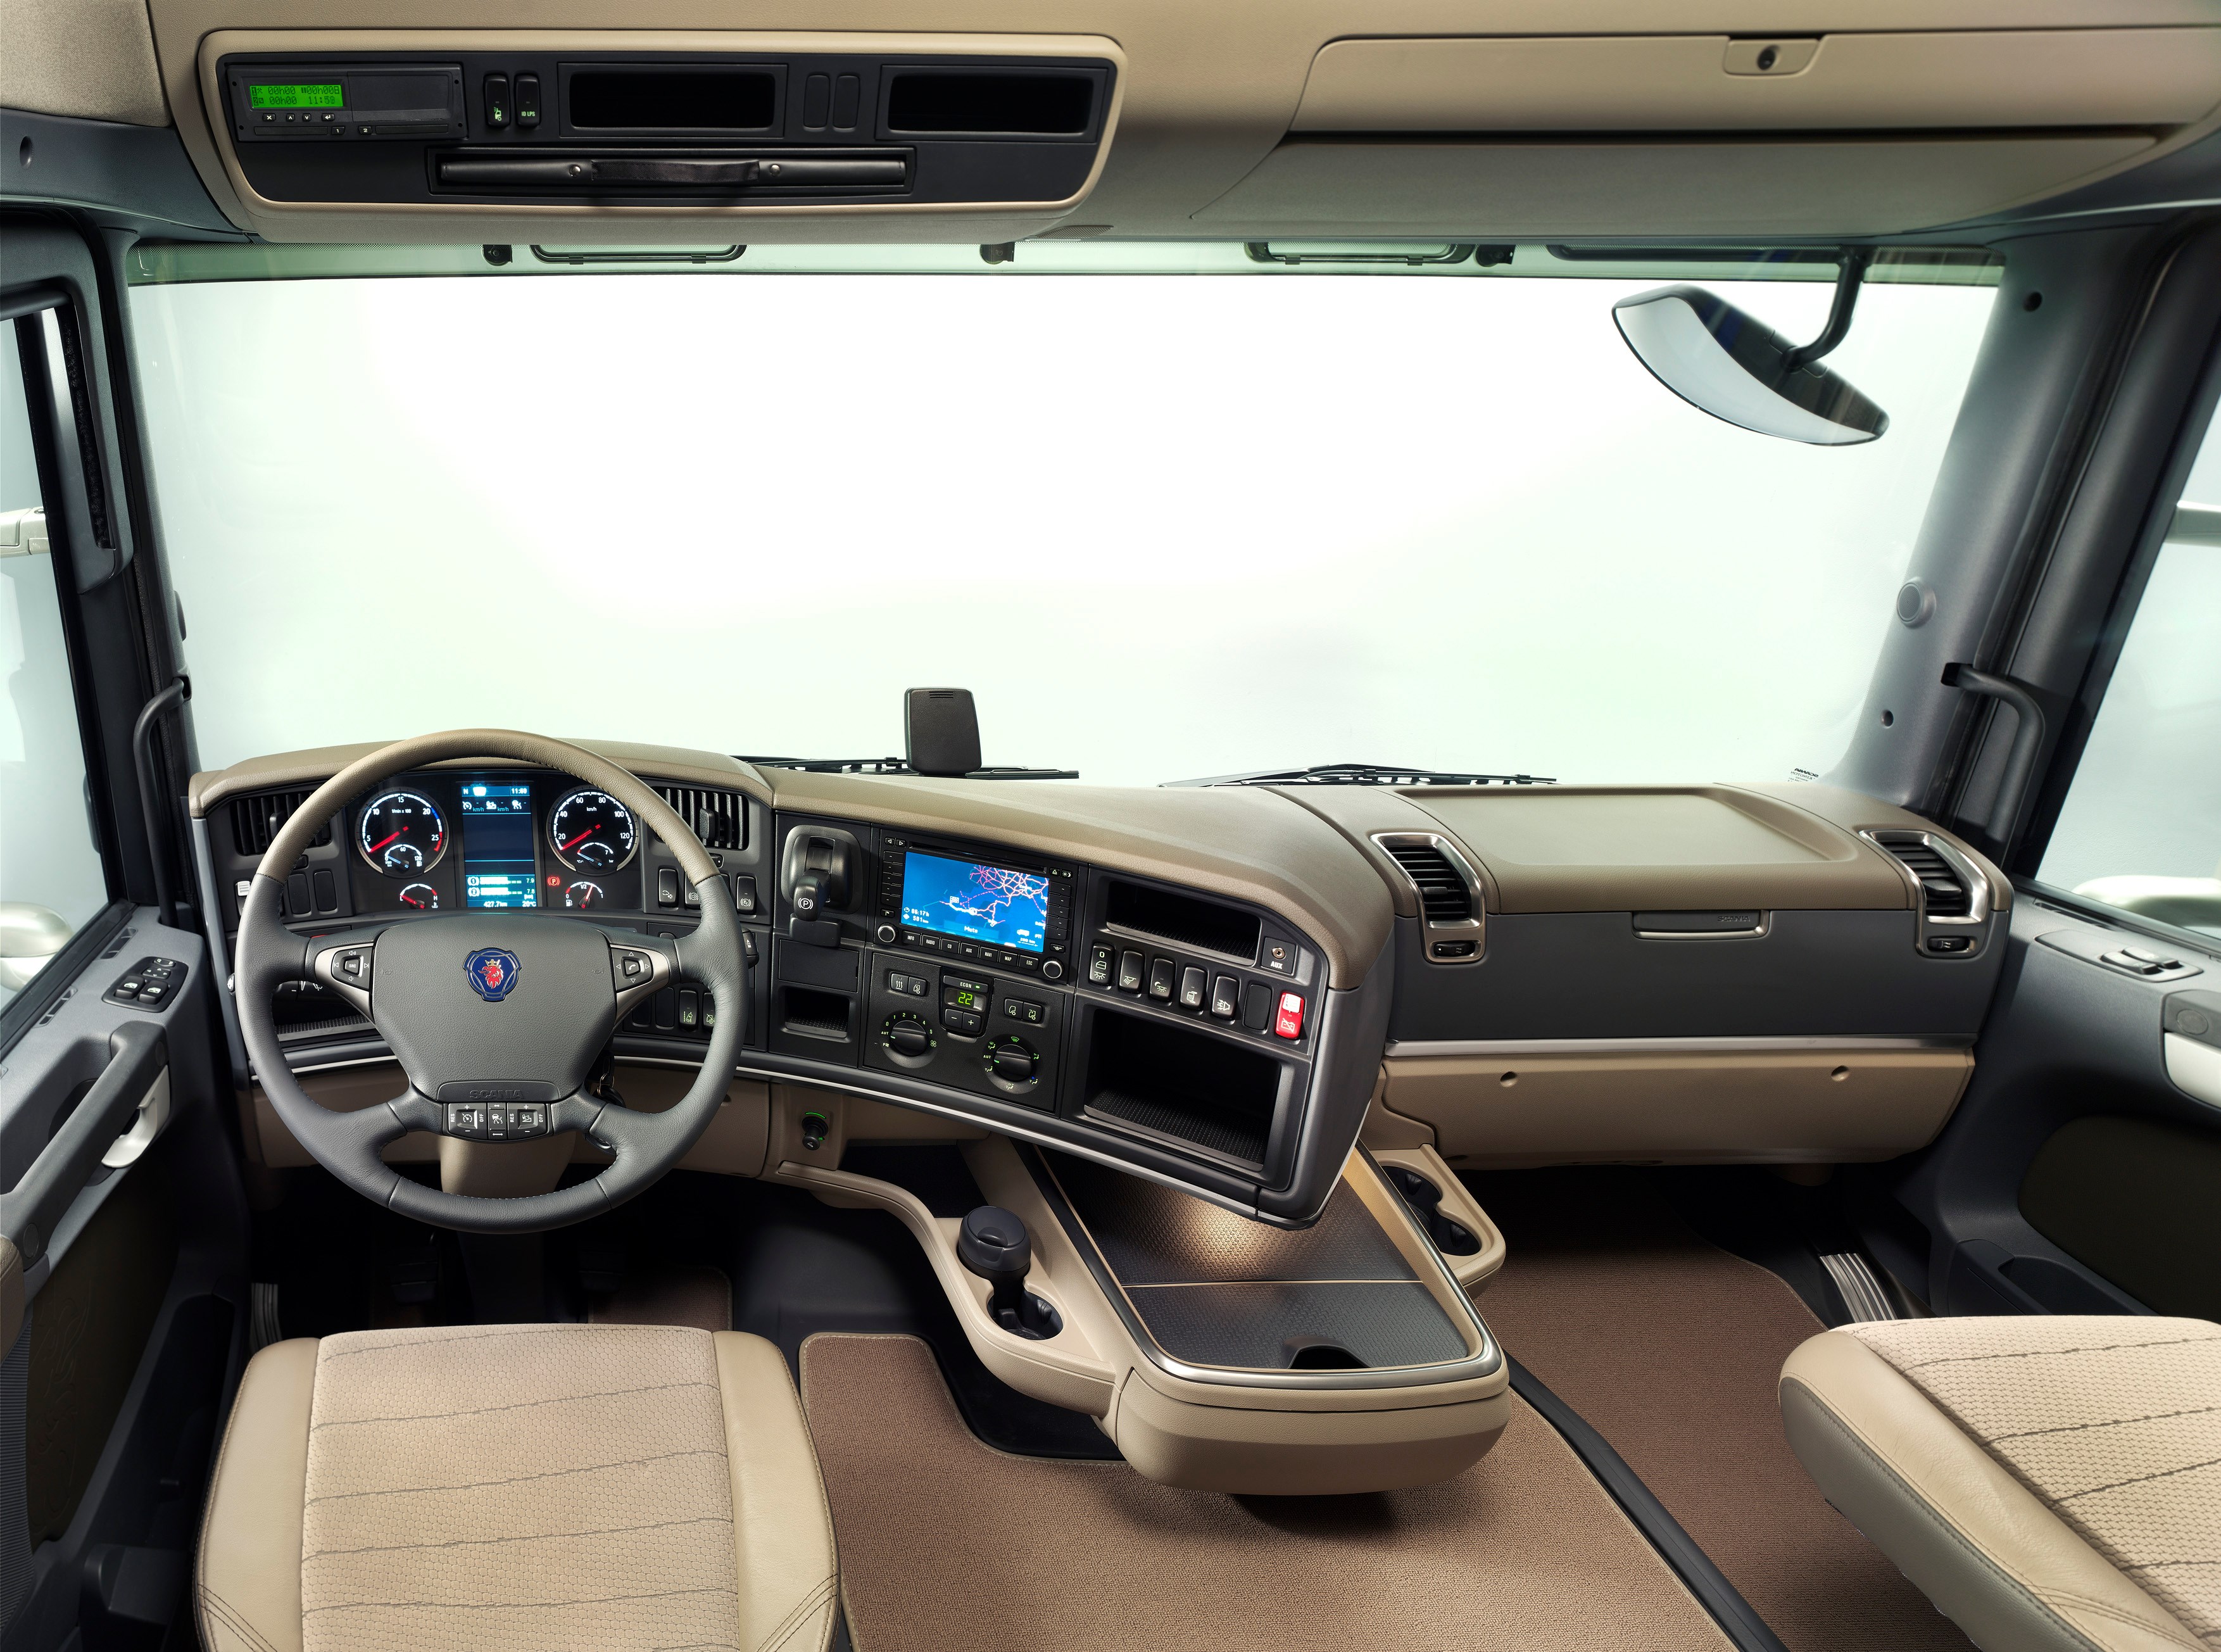 Scania R730 - Scania P Series Interior , HD Wallpaper & Backgrounds